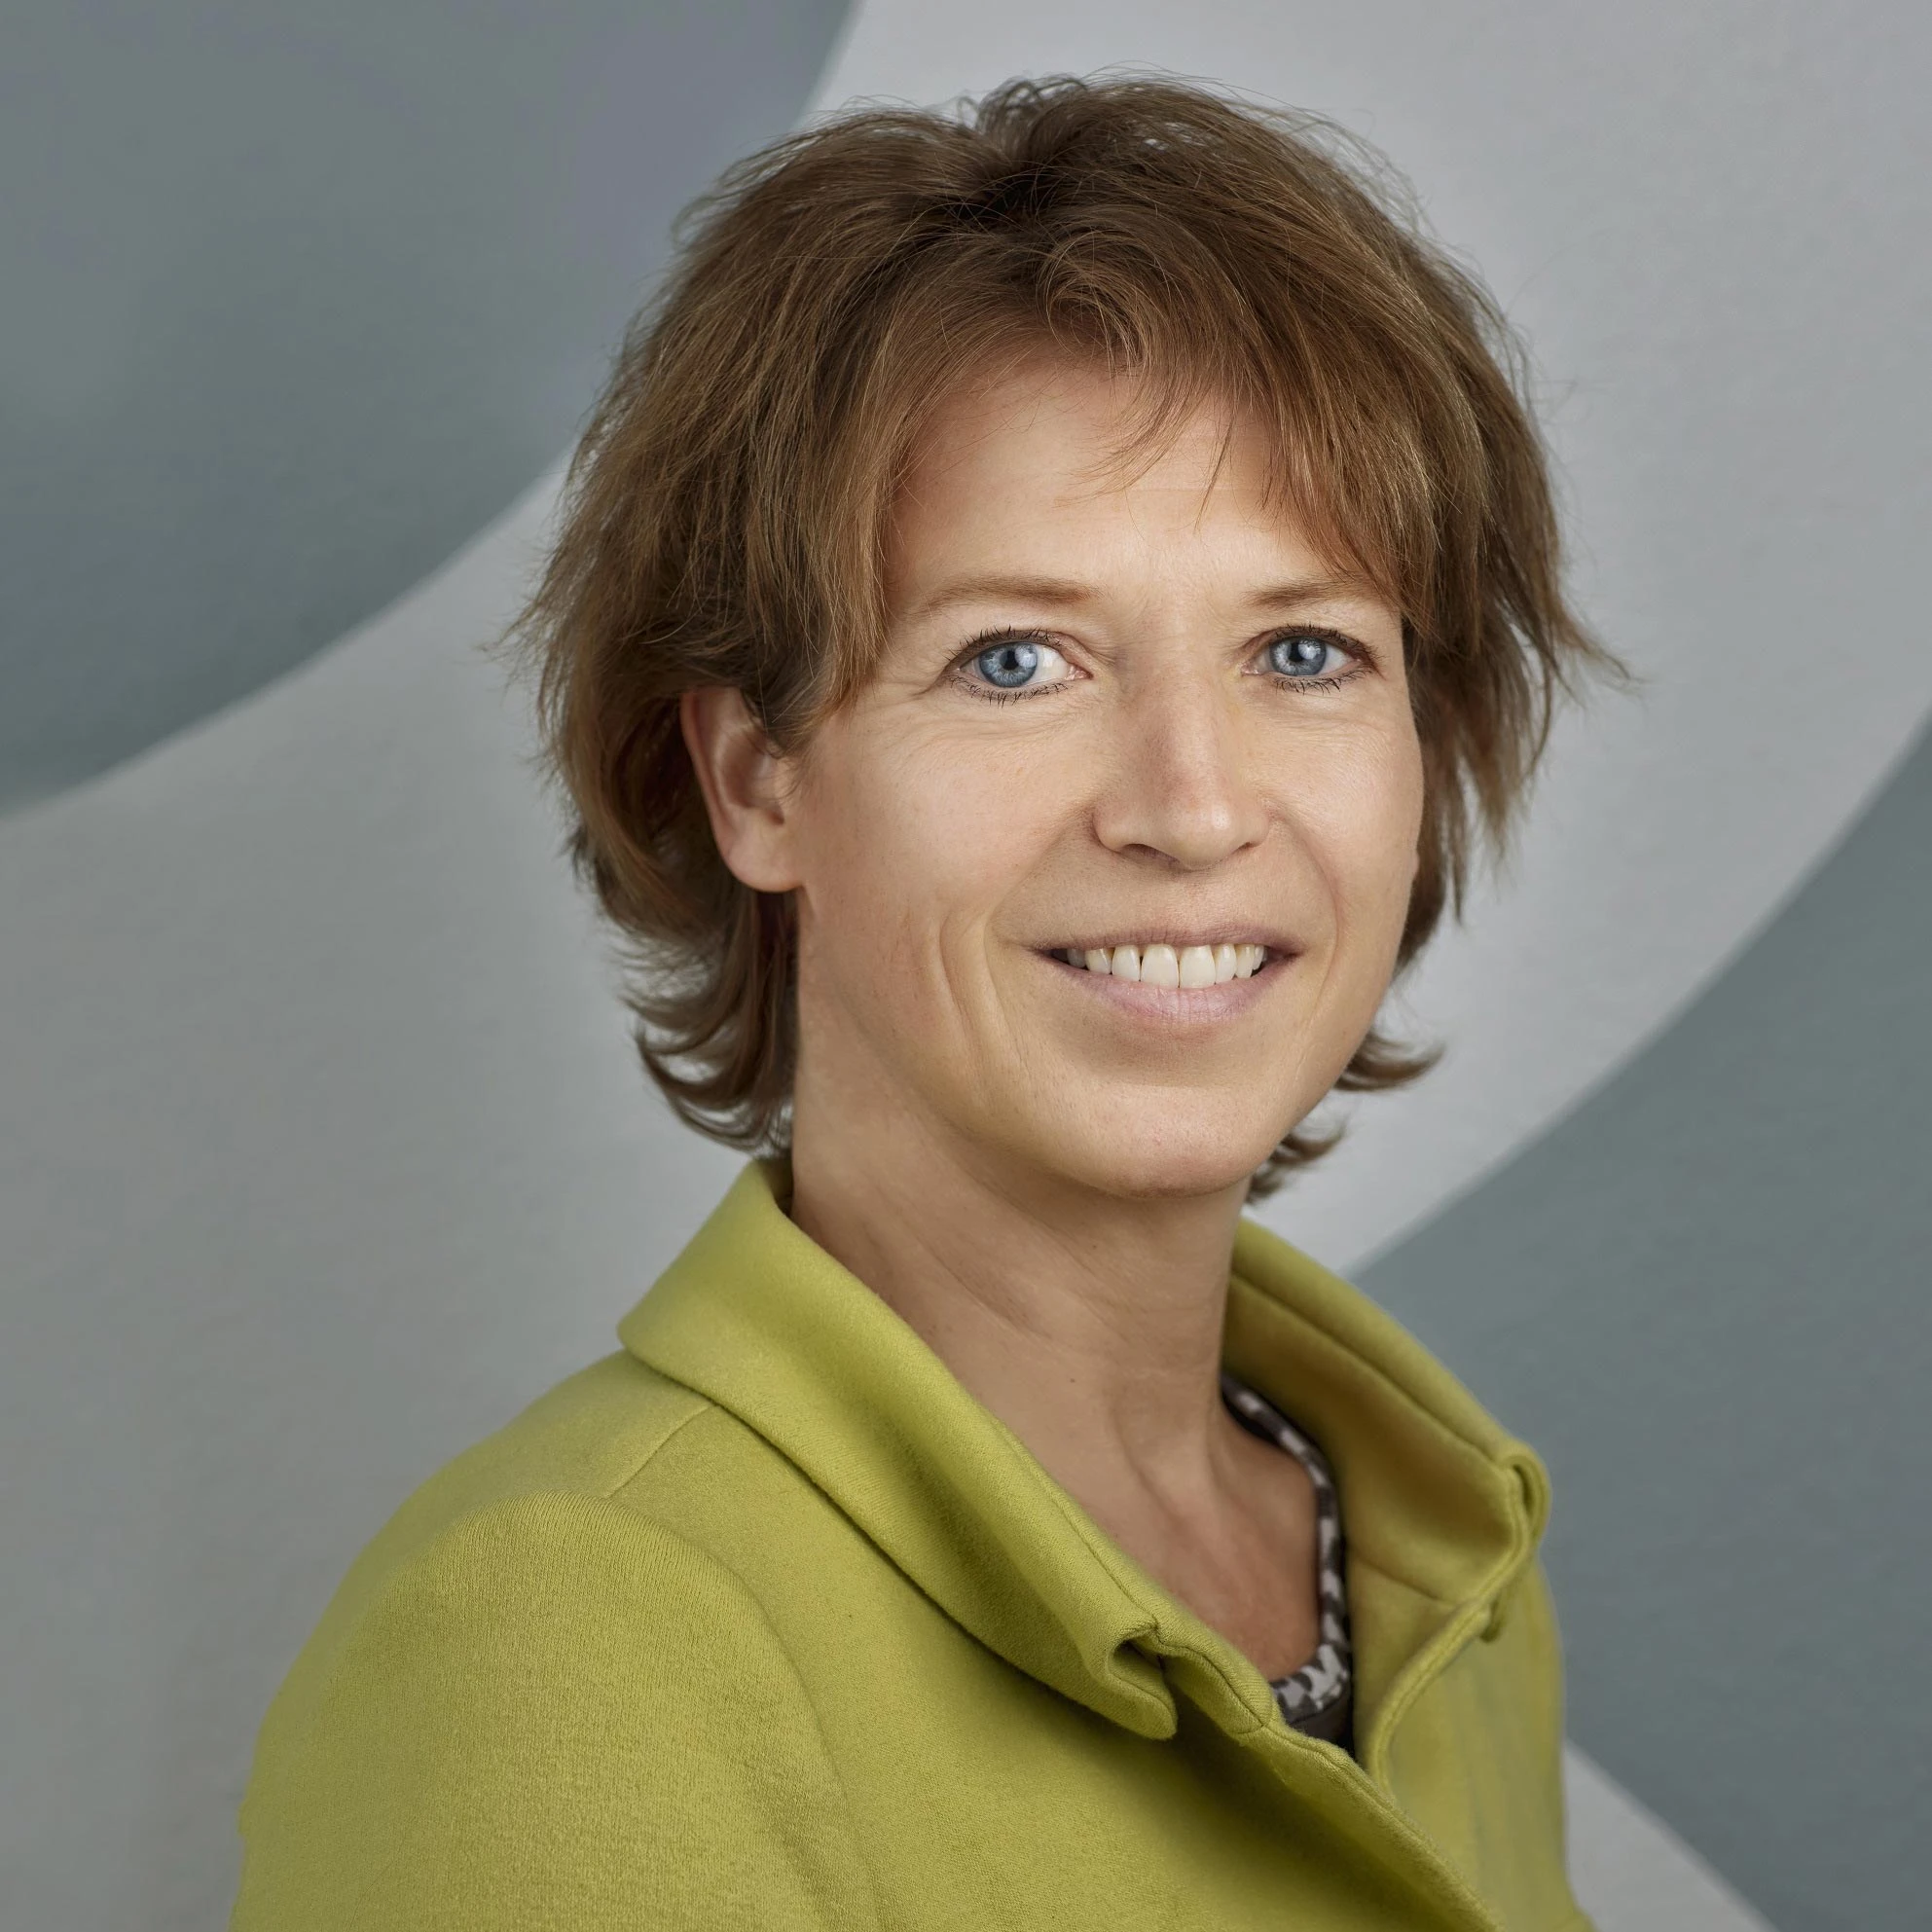 Drs. G.A.C. (Geraldine) Leegwater CFA is, since September 2015 Member of the Board of Trustees of ABP, the largest pension fund in the Netherlands (420 bn euro).